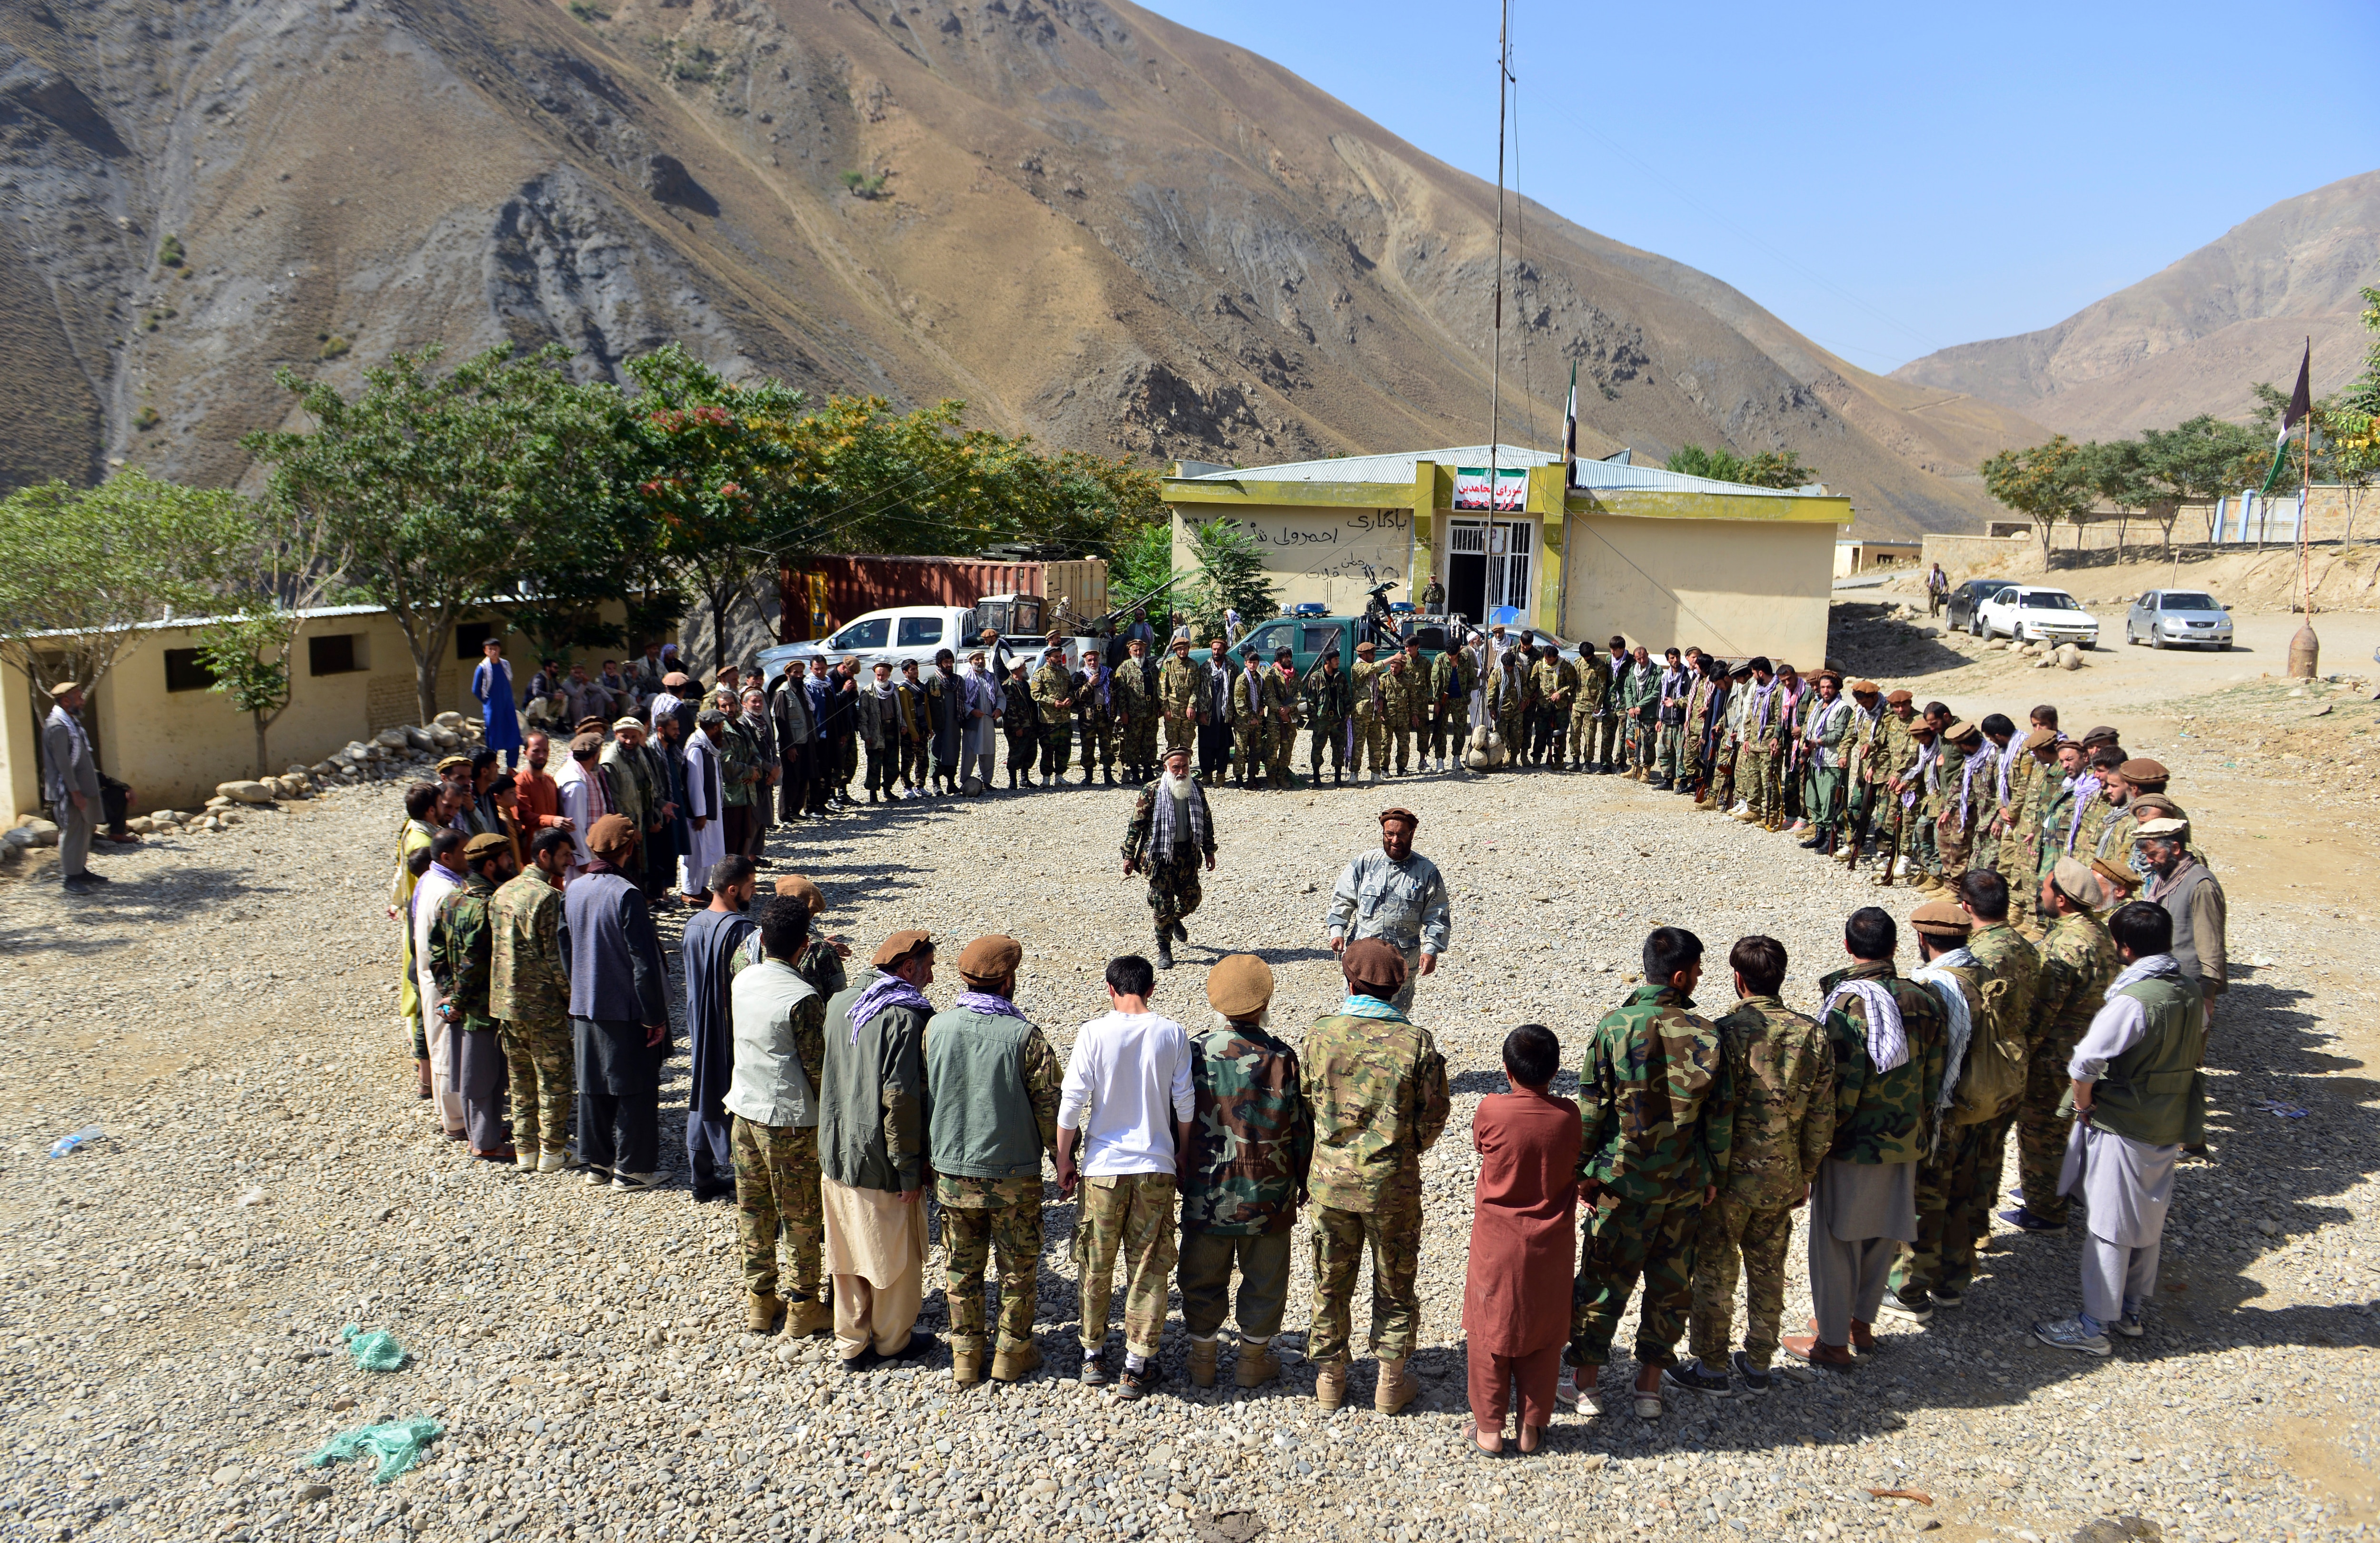 Militiamen loyal to Ahmad Massoud, son of the late Ahmad Shah Massoud, take part in a training exercise, in Panjshir province, northeastern Afghanistan, Monday, Aug. 30, 2021. The Panjshir Valley is the last region not under Taliban control following thei